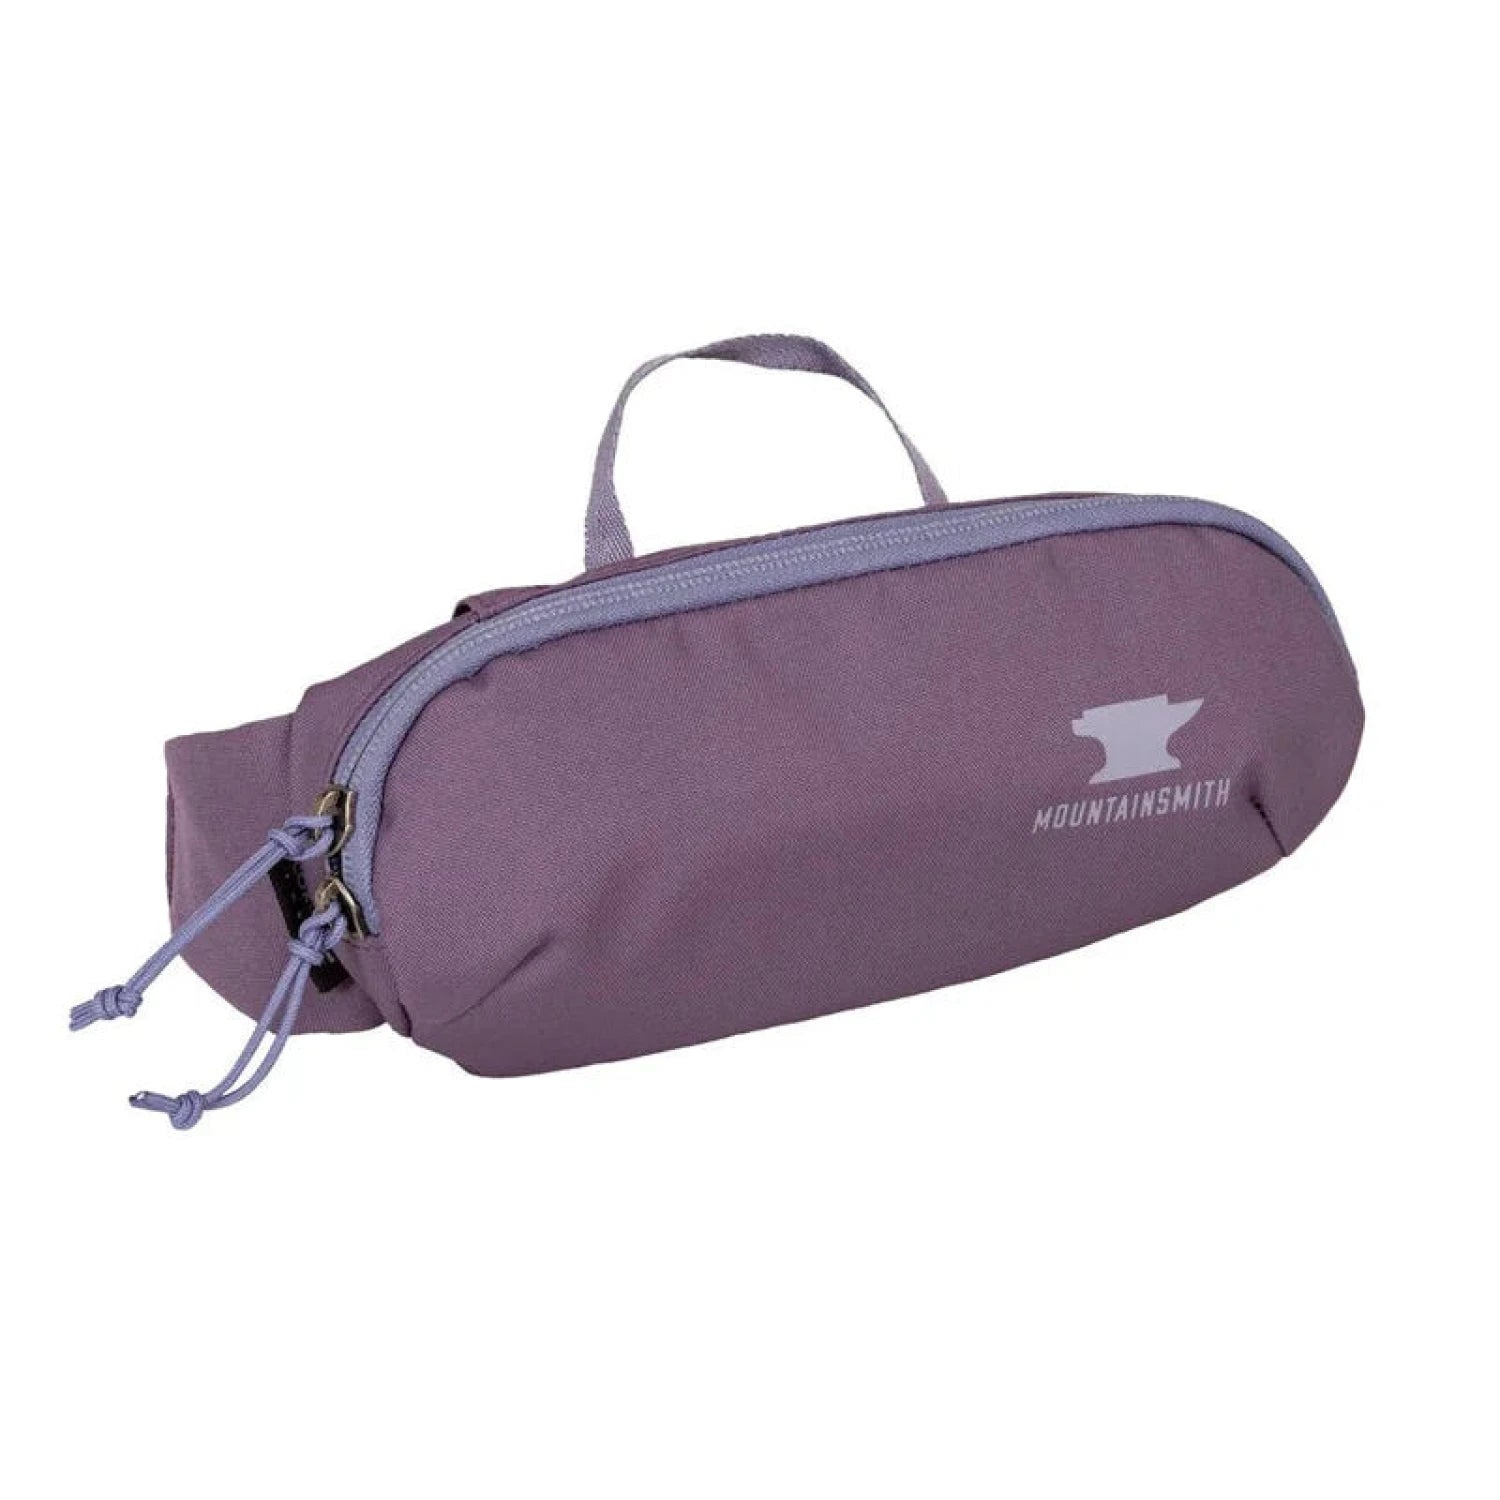 Mountainsmith Groove Hip Pack shown in the Black Plum color option.